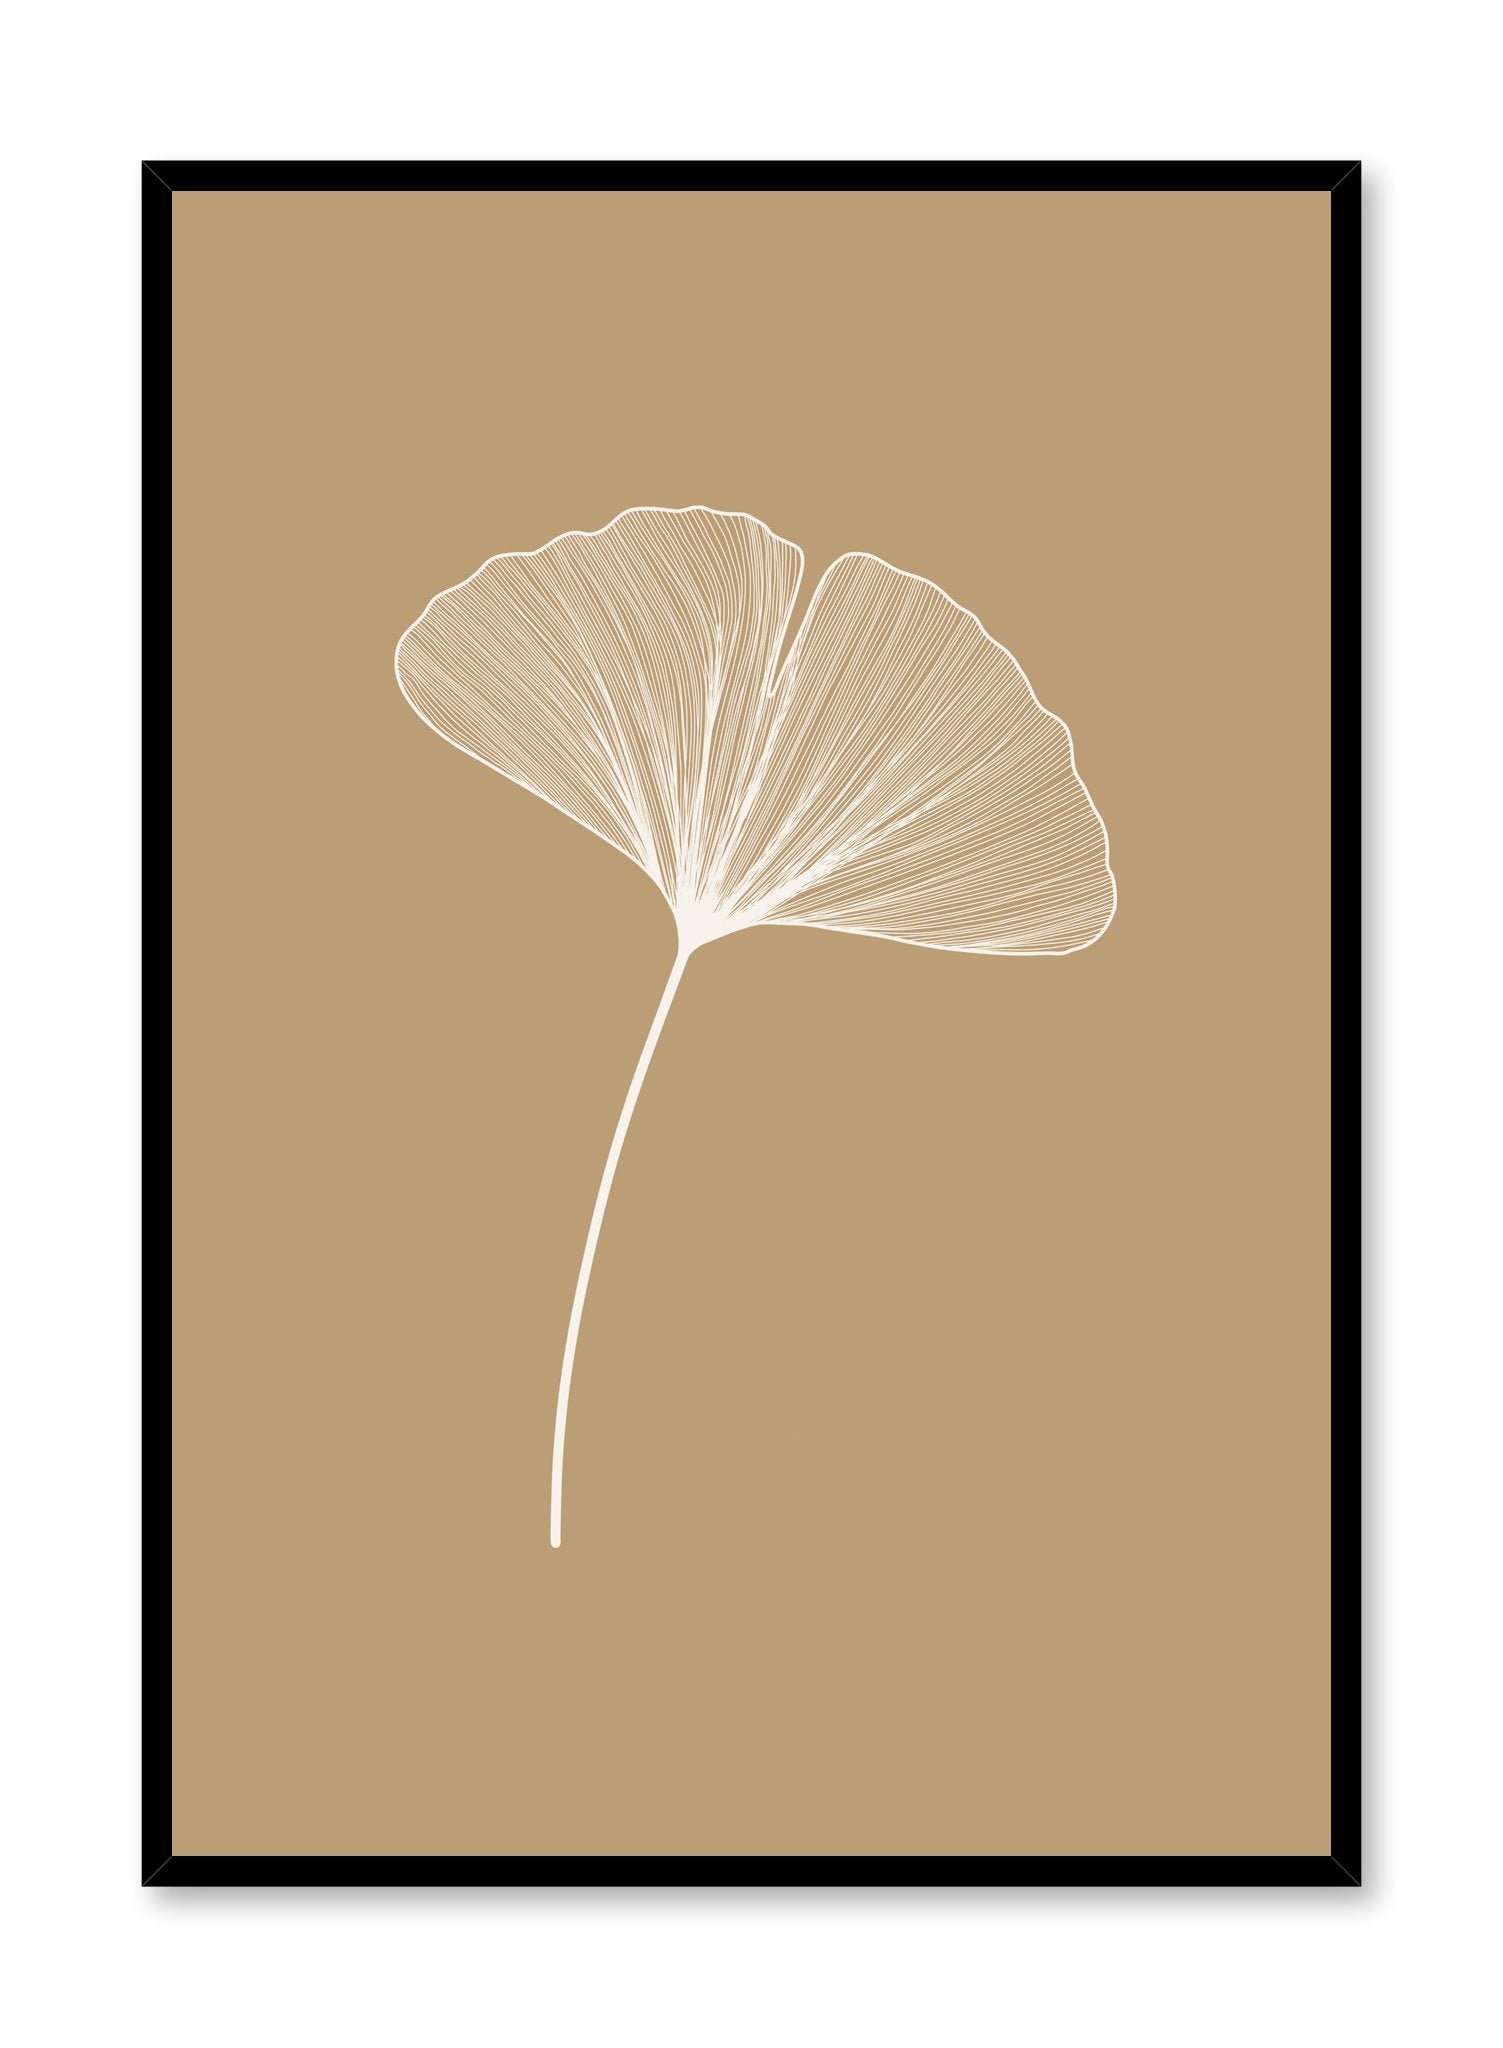 Modern minimalist botanical illustration poster by Opposite Wall with Ginkgo Leaf